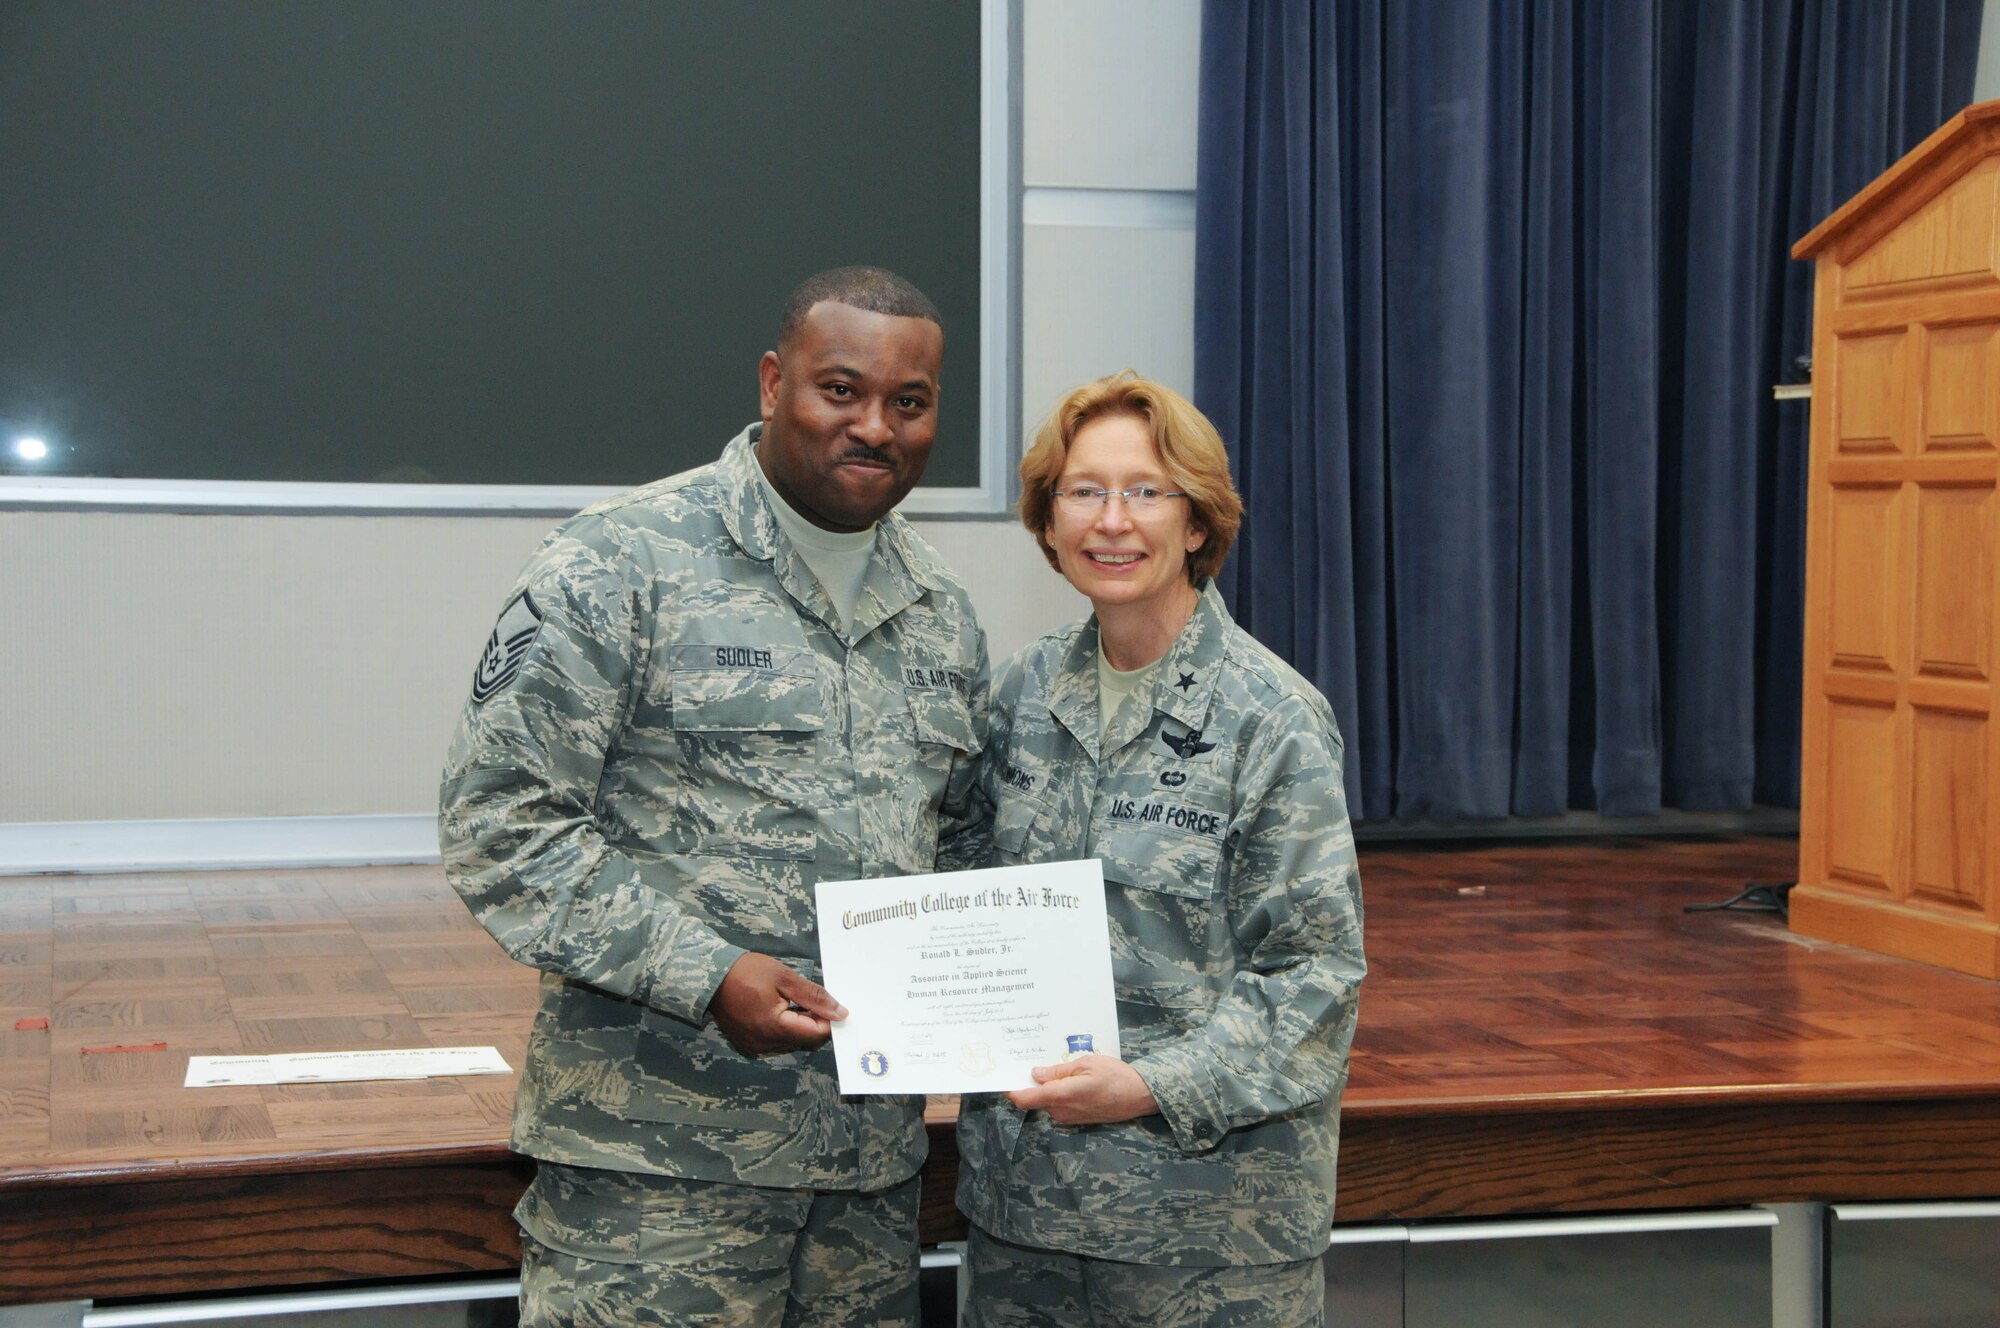 U.S. Air Force Master Sgt. Ronald Sudler, left, a member of the 166th Force Support Squadron, 166th Airlift Wing, receives a certificate from Brig. Gen. Carol Timmons, assistant adjutant general for air, Delaware National Guard to recognize Sudler’s attainment of a Community College of the Air Force associate of applied science degree in human resource management at a CCAF Class of October 2013 graduation ceremony held Nov. 3, 2013 at the New Castle Air National Guard Base, Del. (U.S. Air National Guard photo by Tech. Sgt. Robin Meredith)